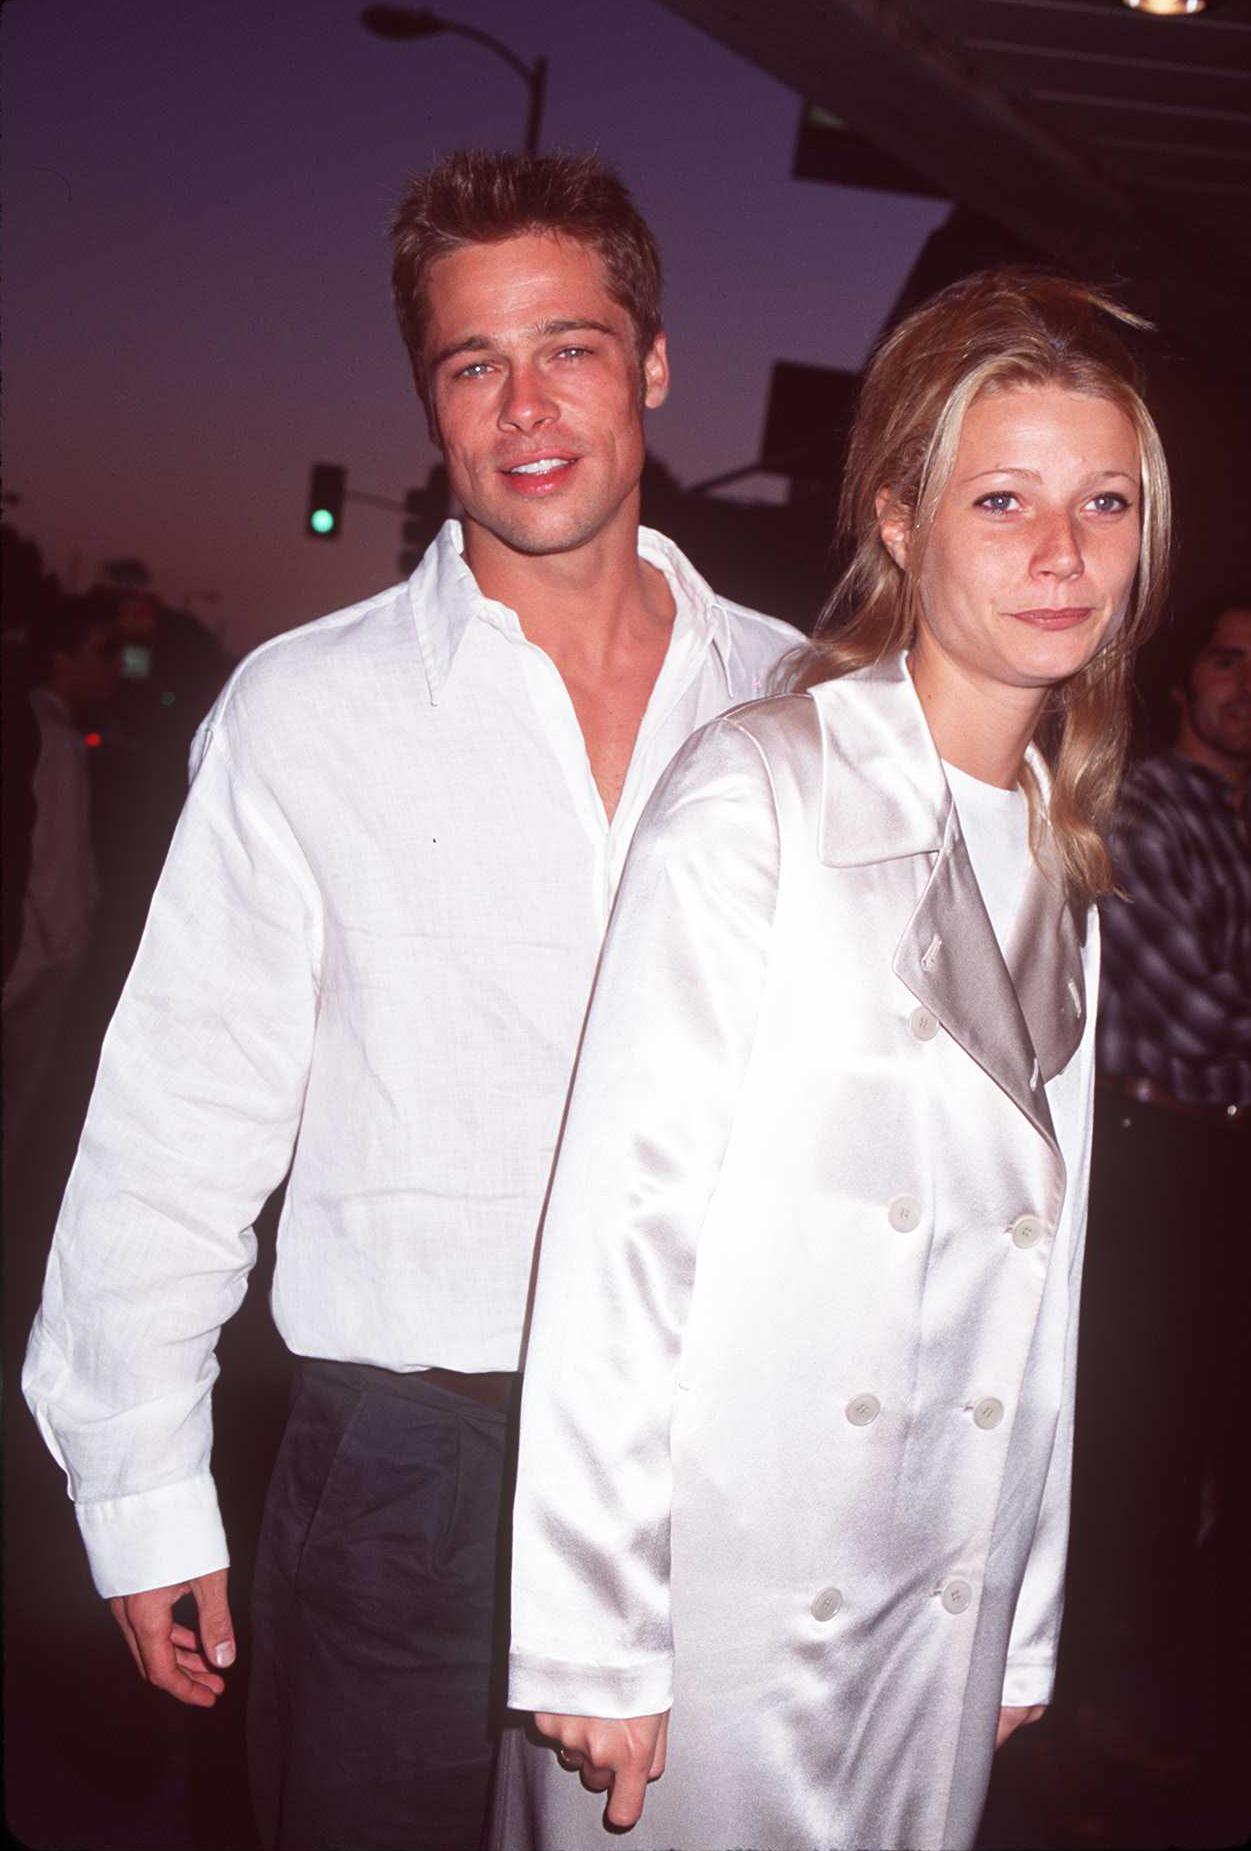 Brad Pitt And Girlfriend Gwyneth Paltrow At The Premiere Of "Oblivion" In Los Angeles, California on July 11, 1995.